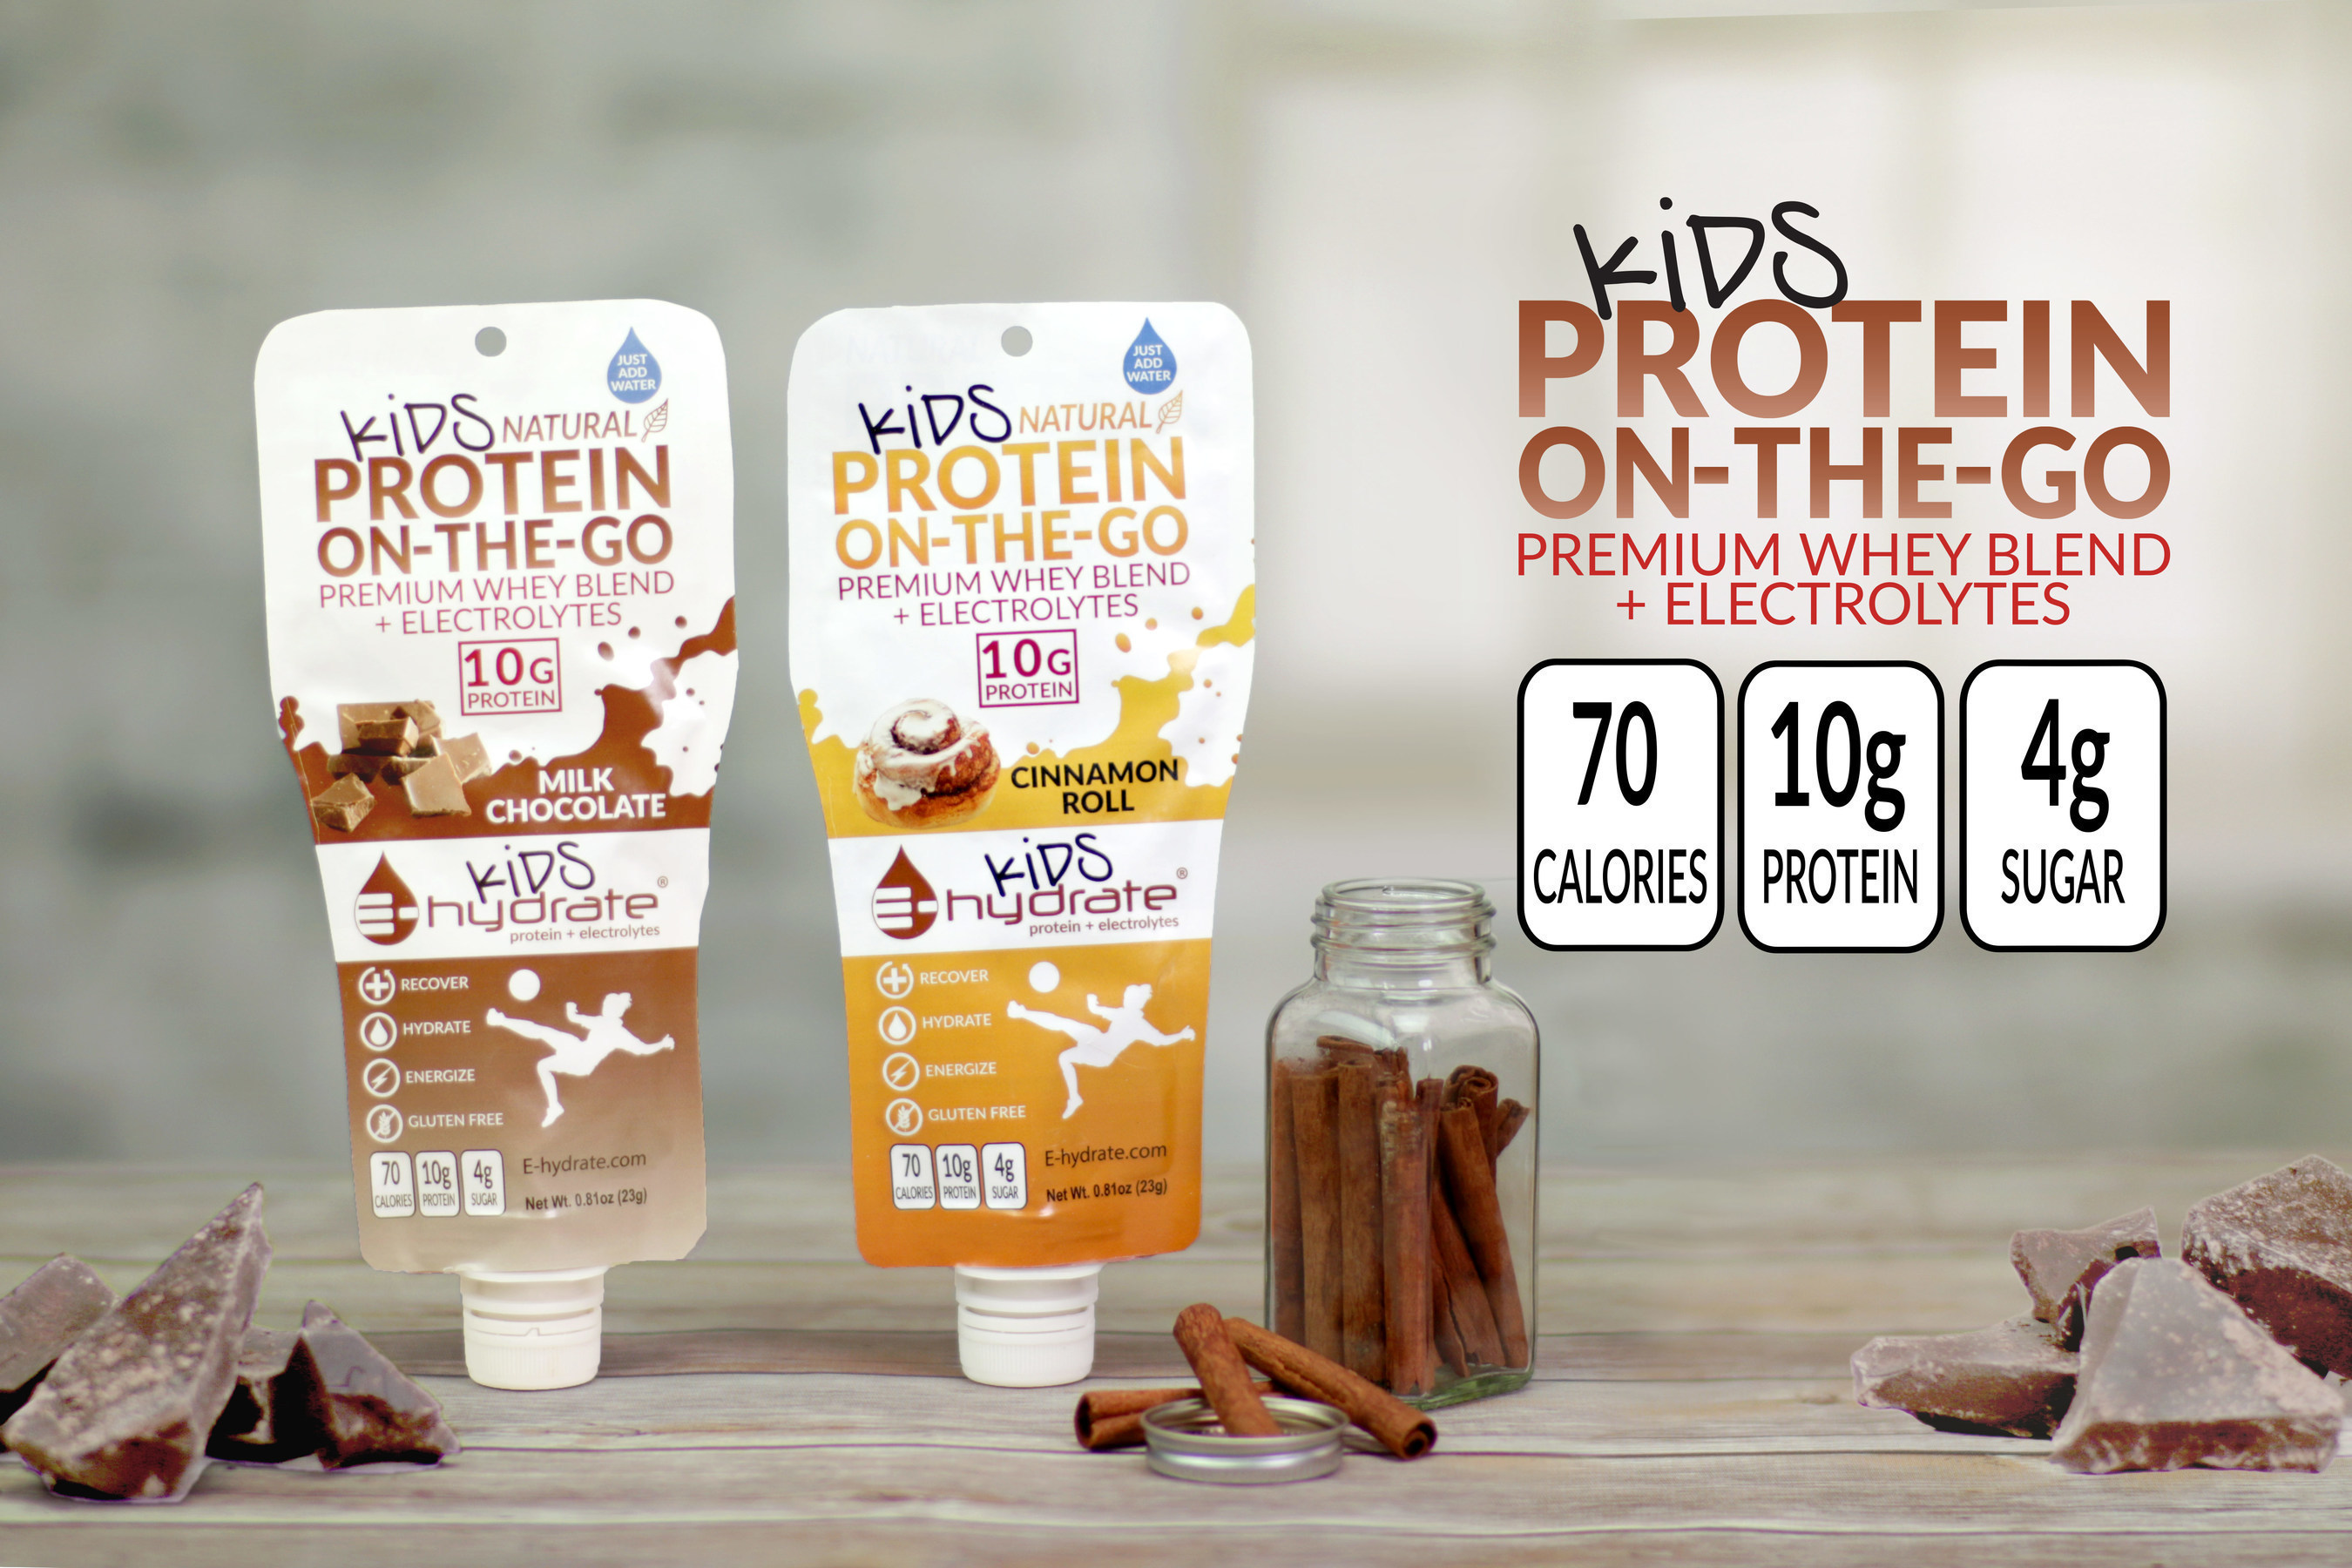 E-hydrate KIDS Protein On-the-Go is the first natural, premium protein drink mix with electrolytes made specifically for kids.